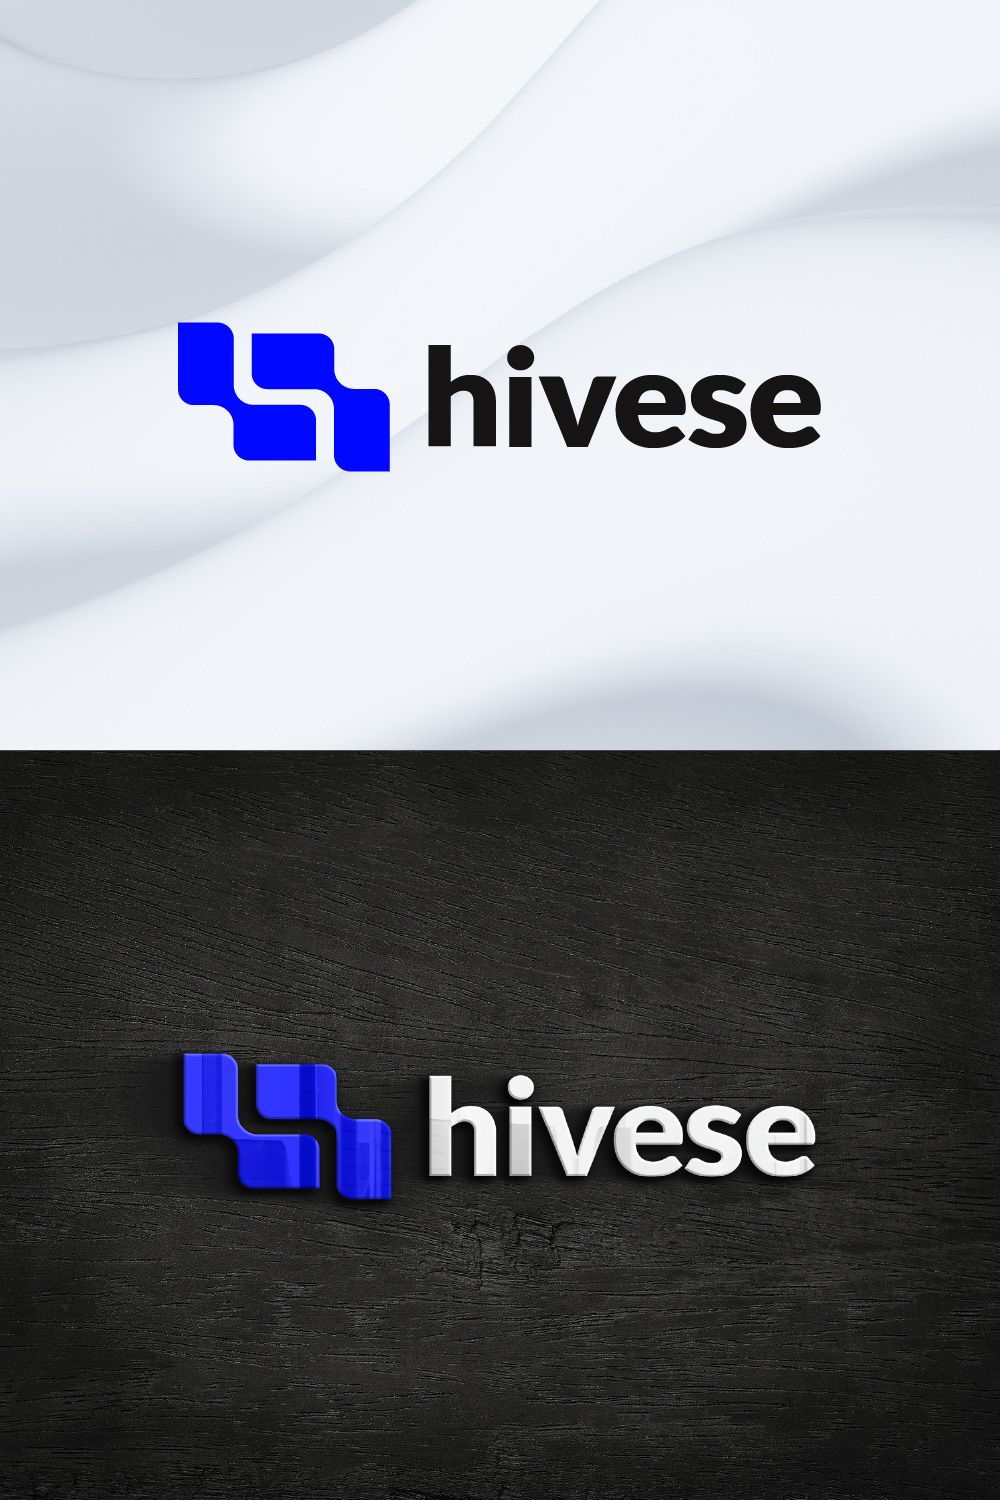 Collection of images of colorful logos with the letter H